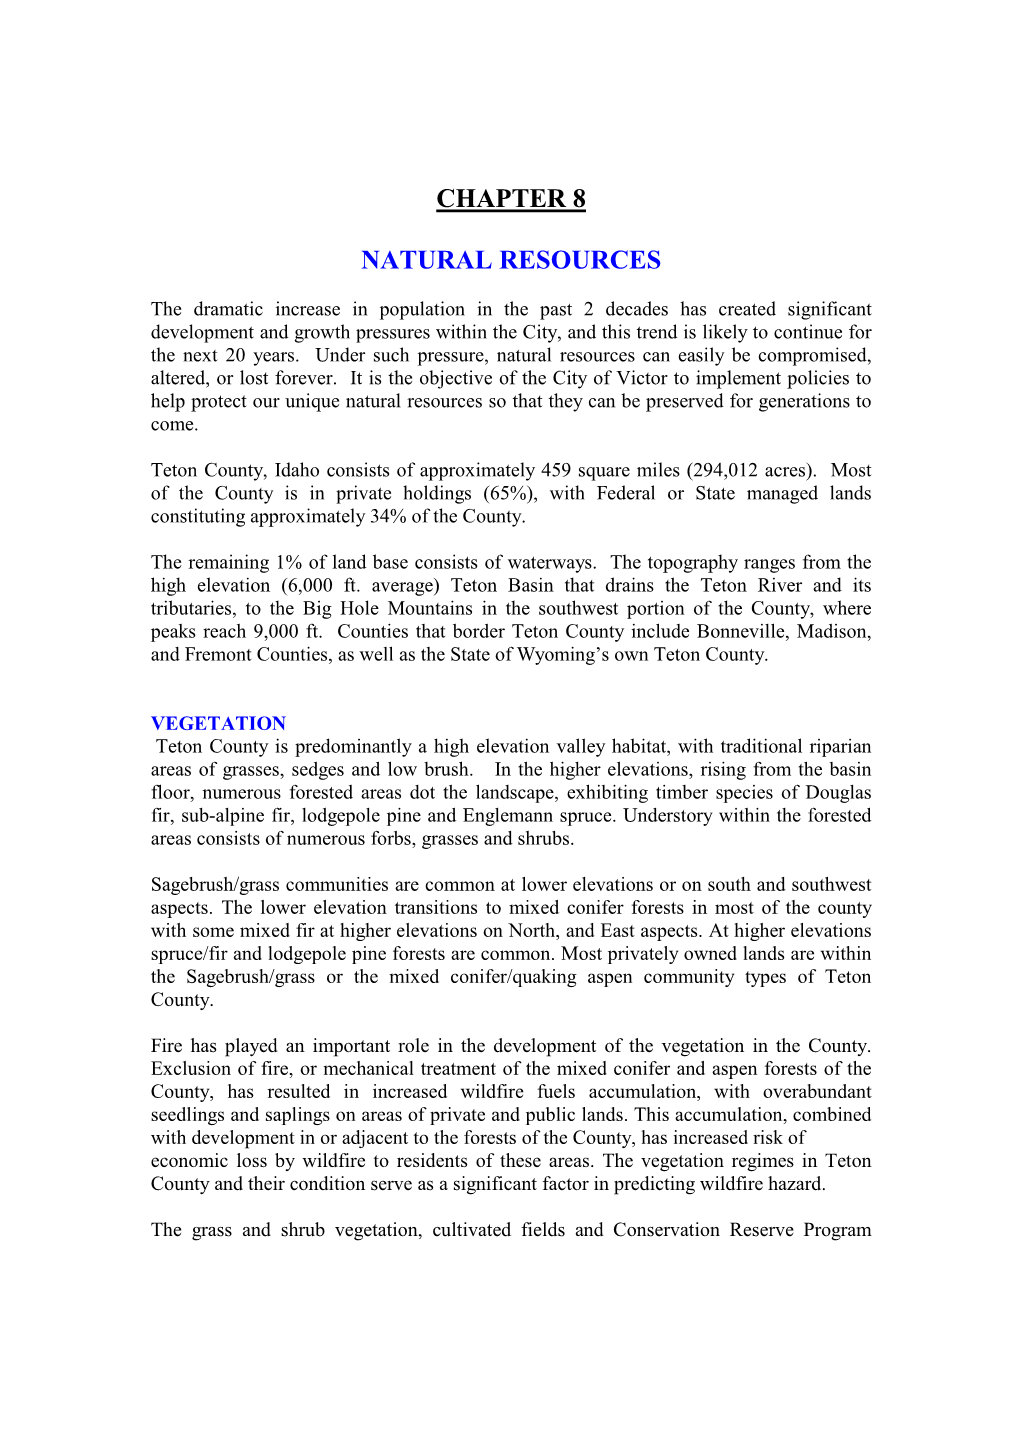 Chapter 8: Natural Resources